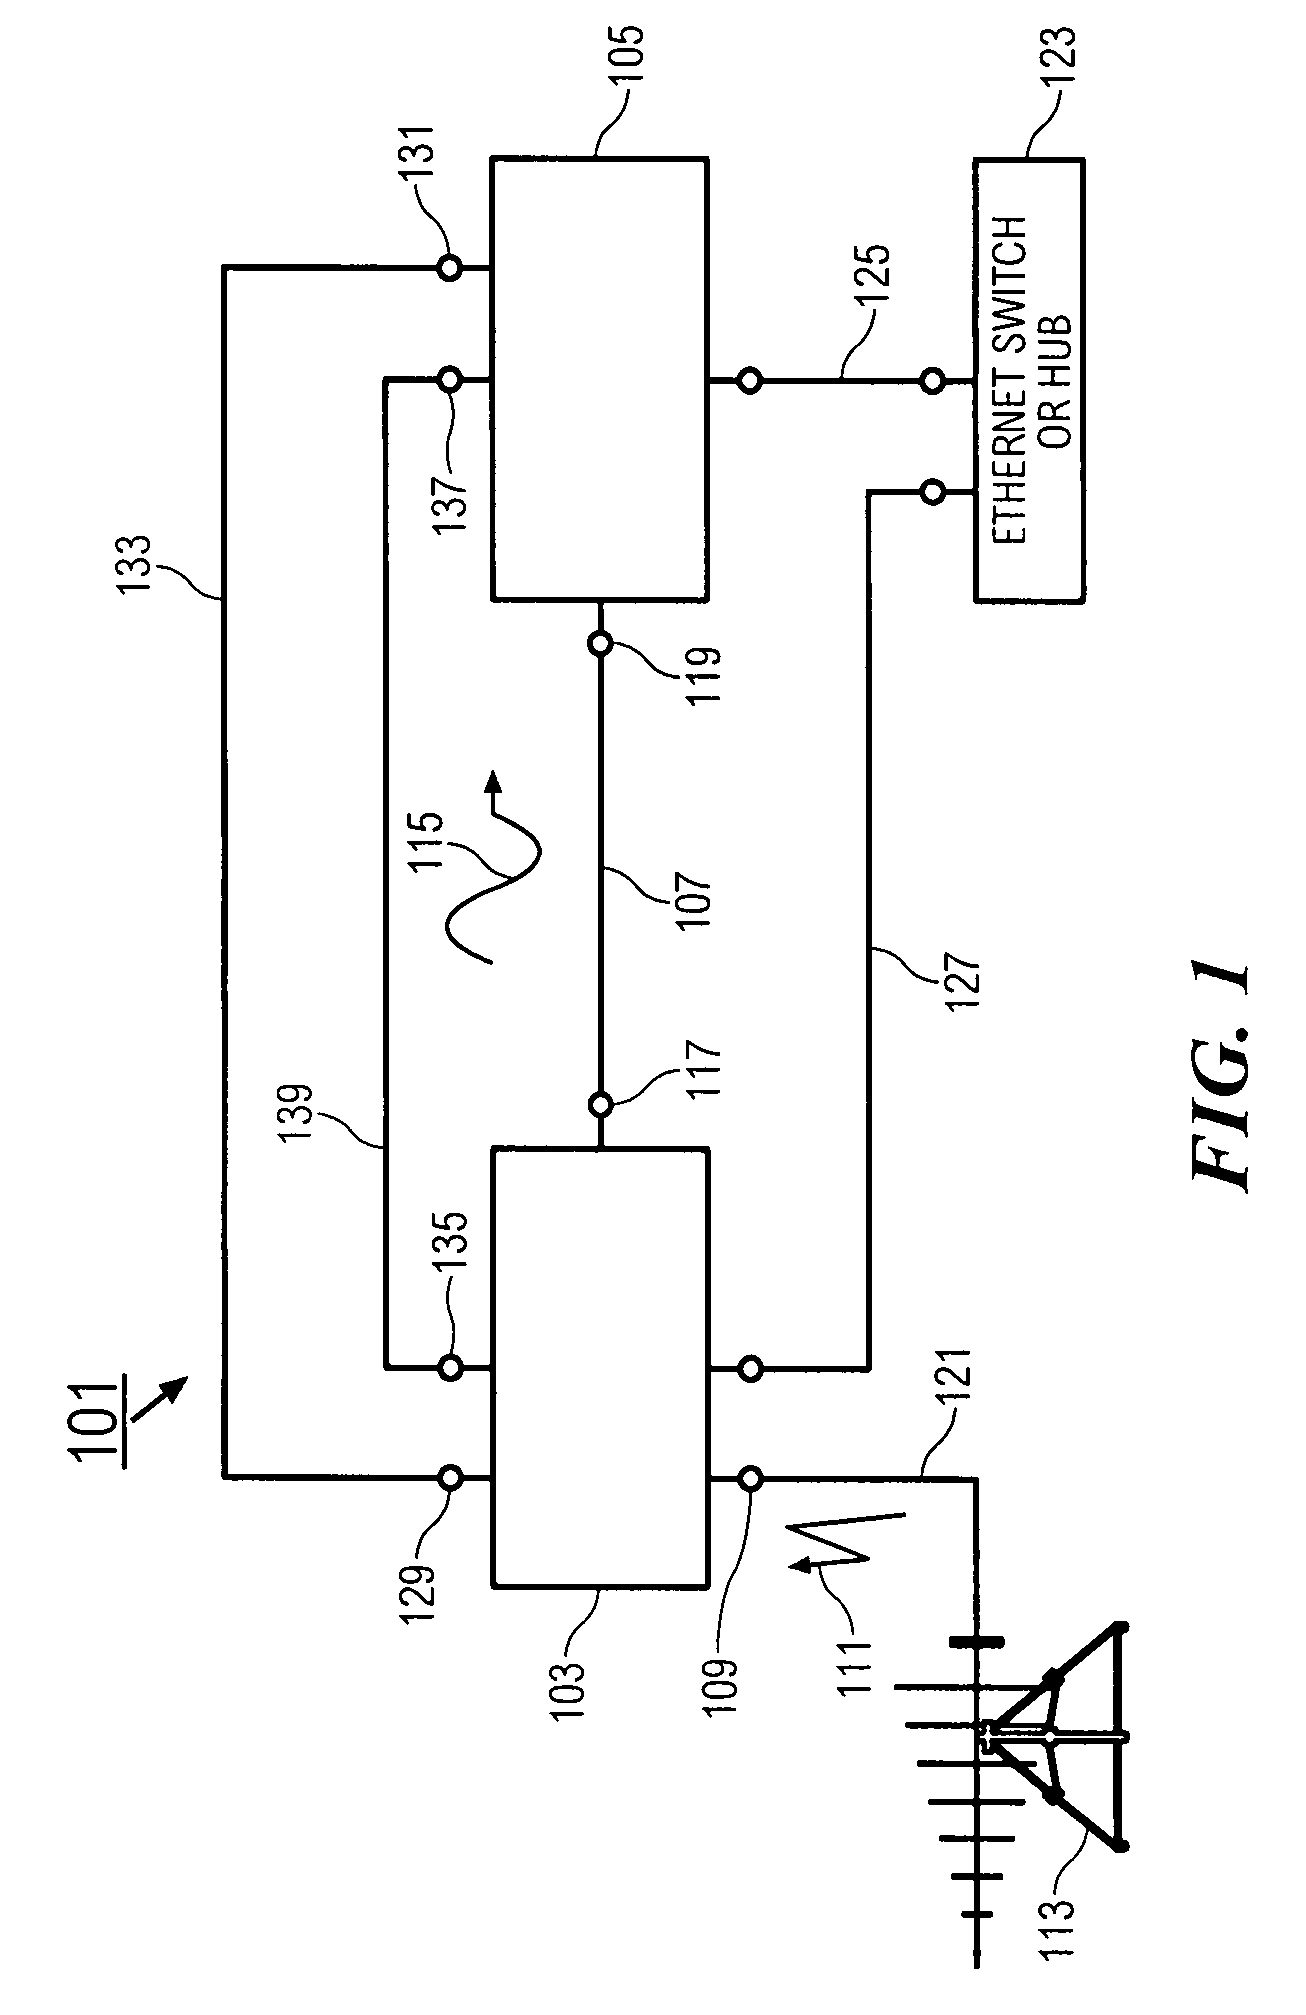 Synchronization of Spectrum Analyzer Frequency Sweep and External Switch